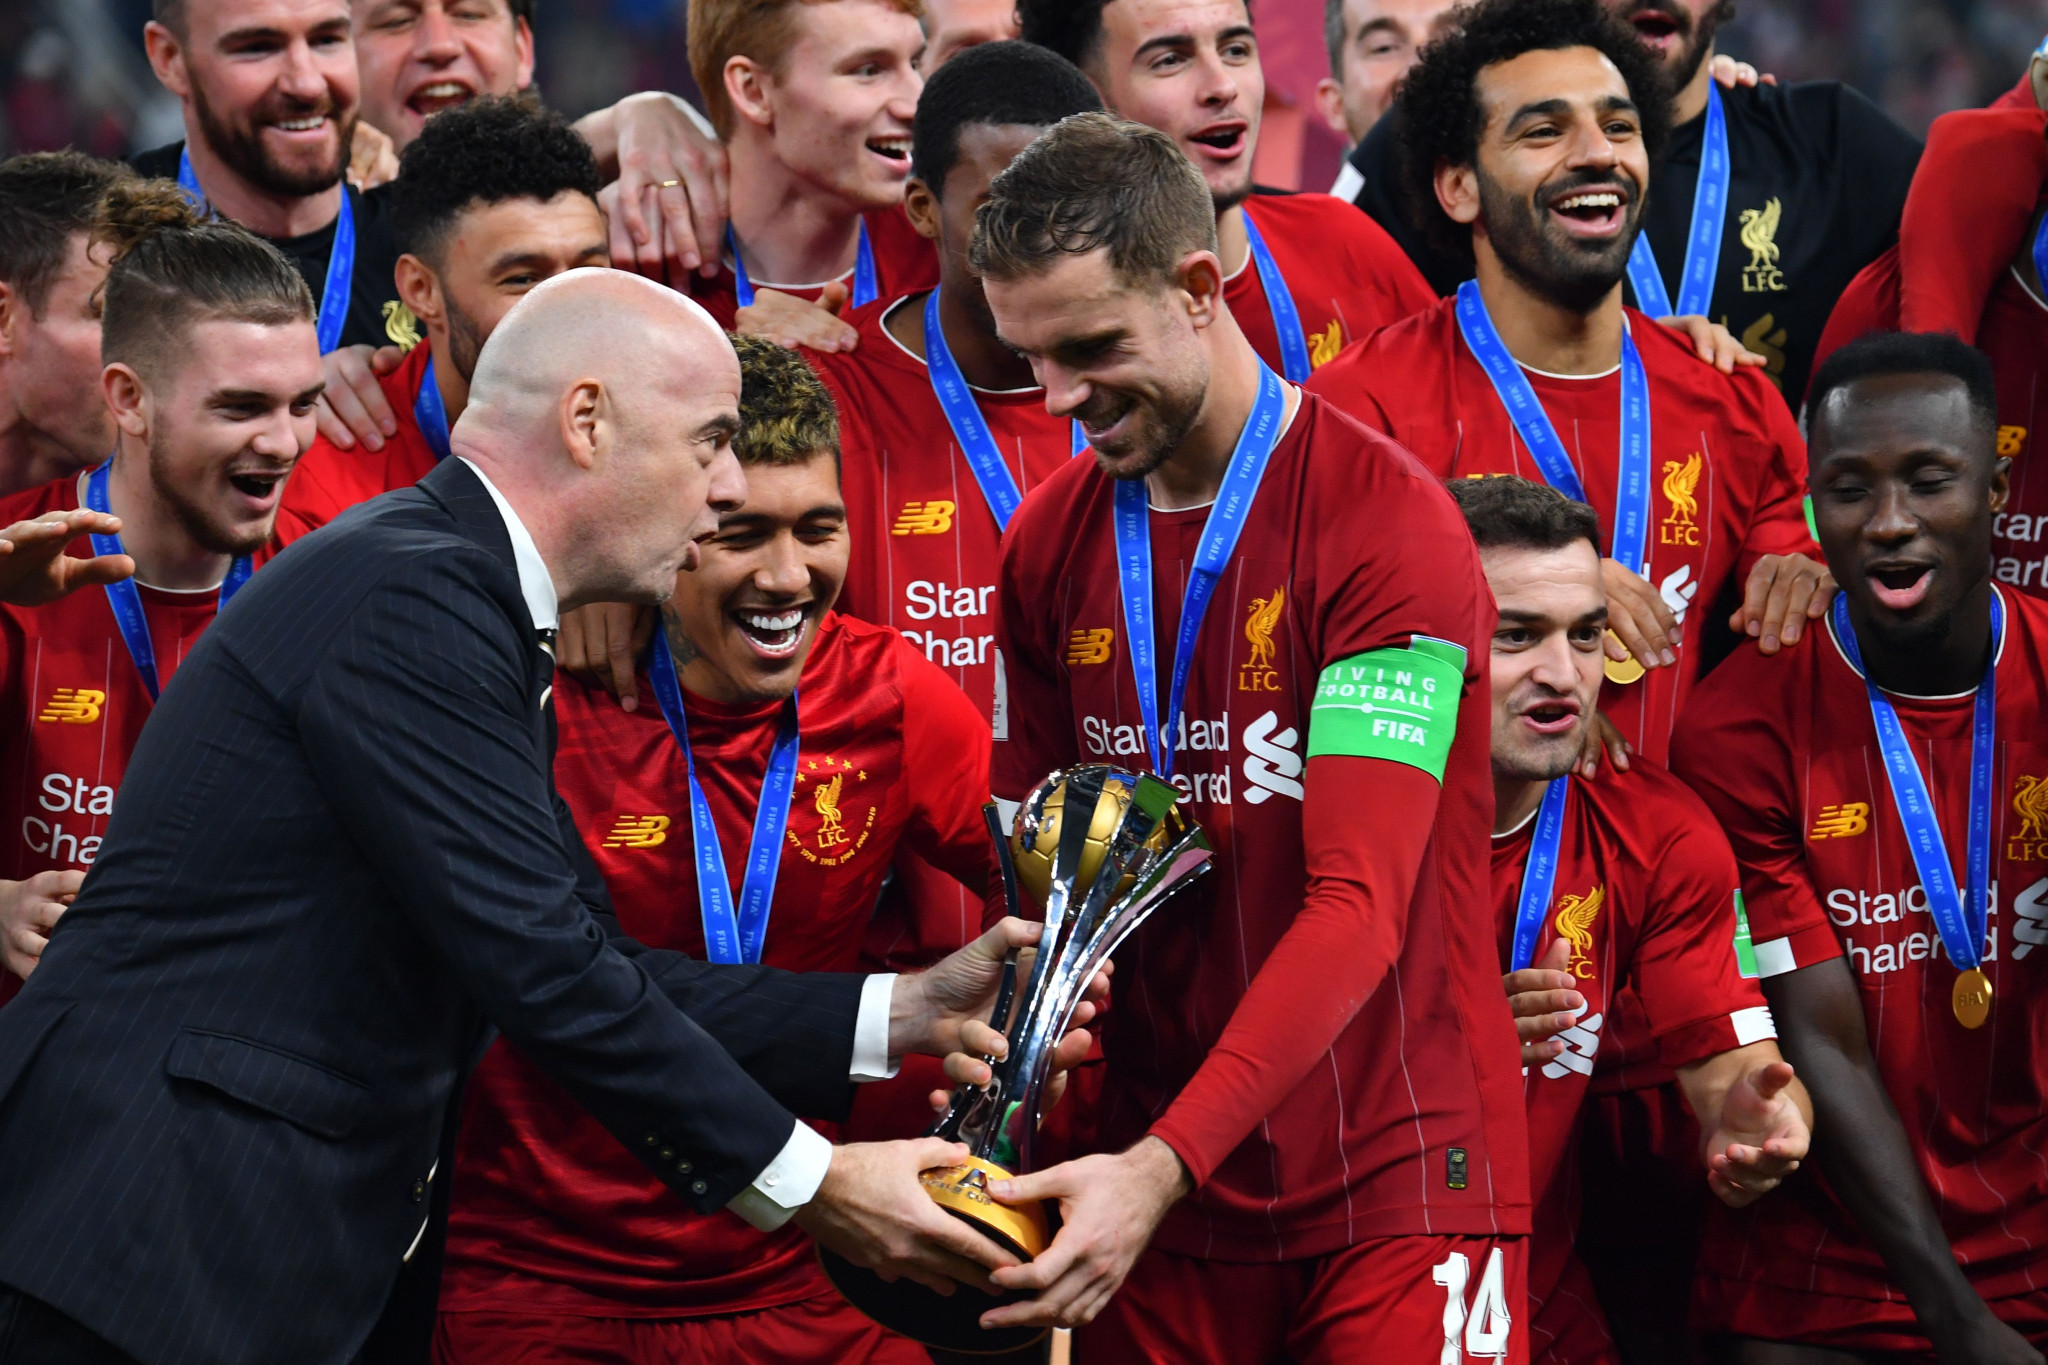 Gianni Infantino presented Liverpool with the Club World Cup on Saturday ©Getty Images